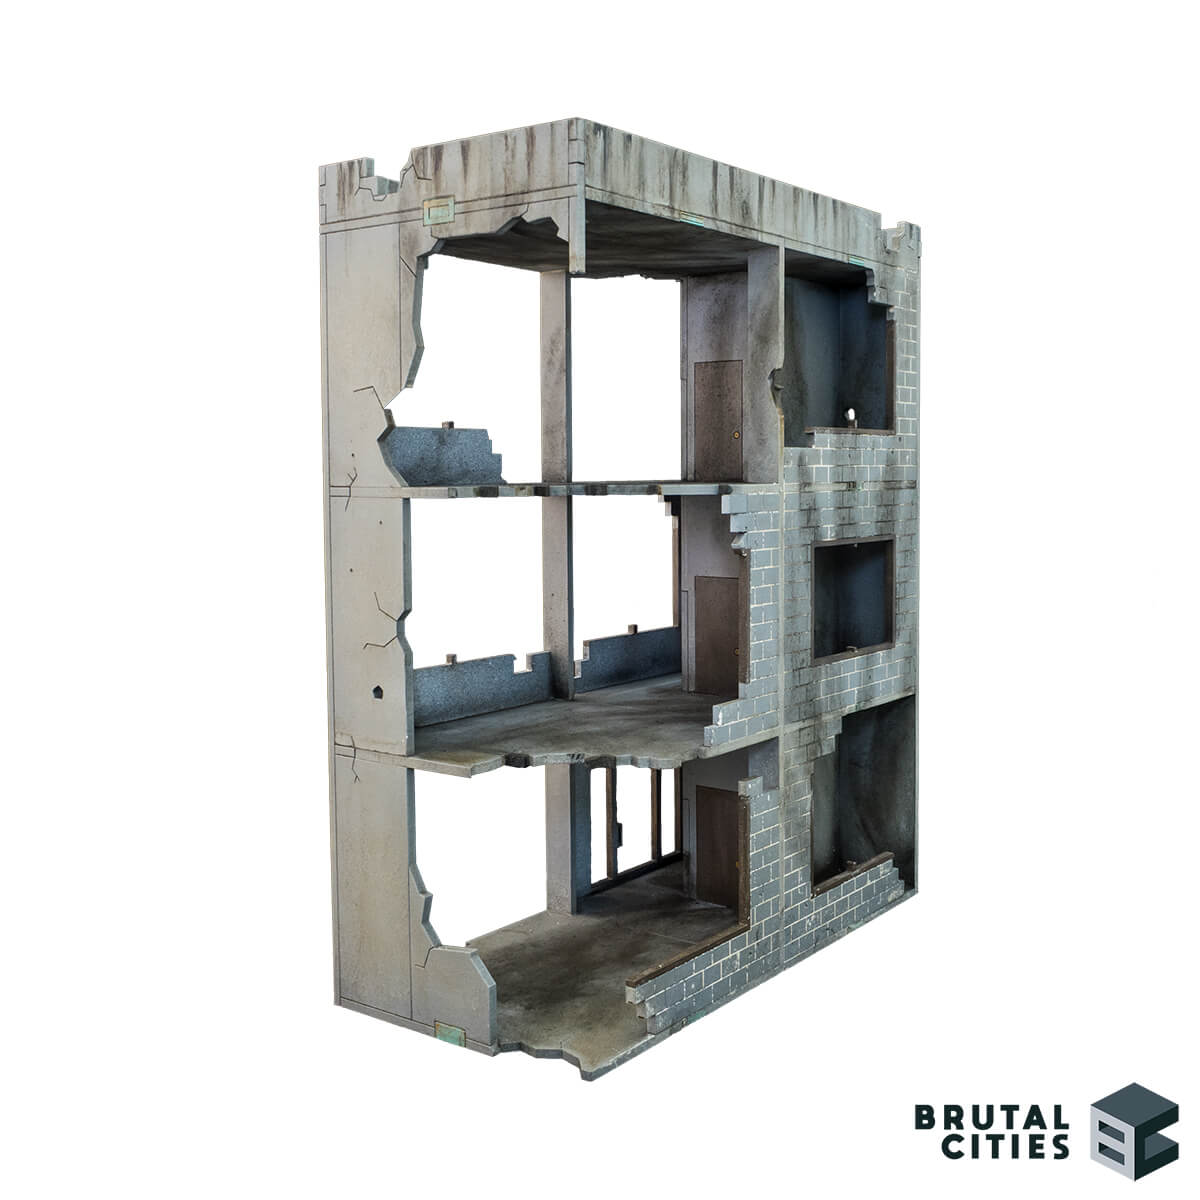 28mm ruined apartment with concrete blocks